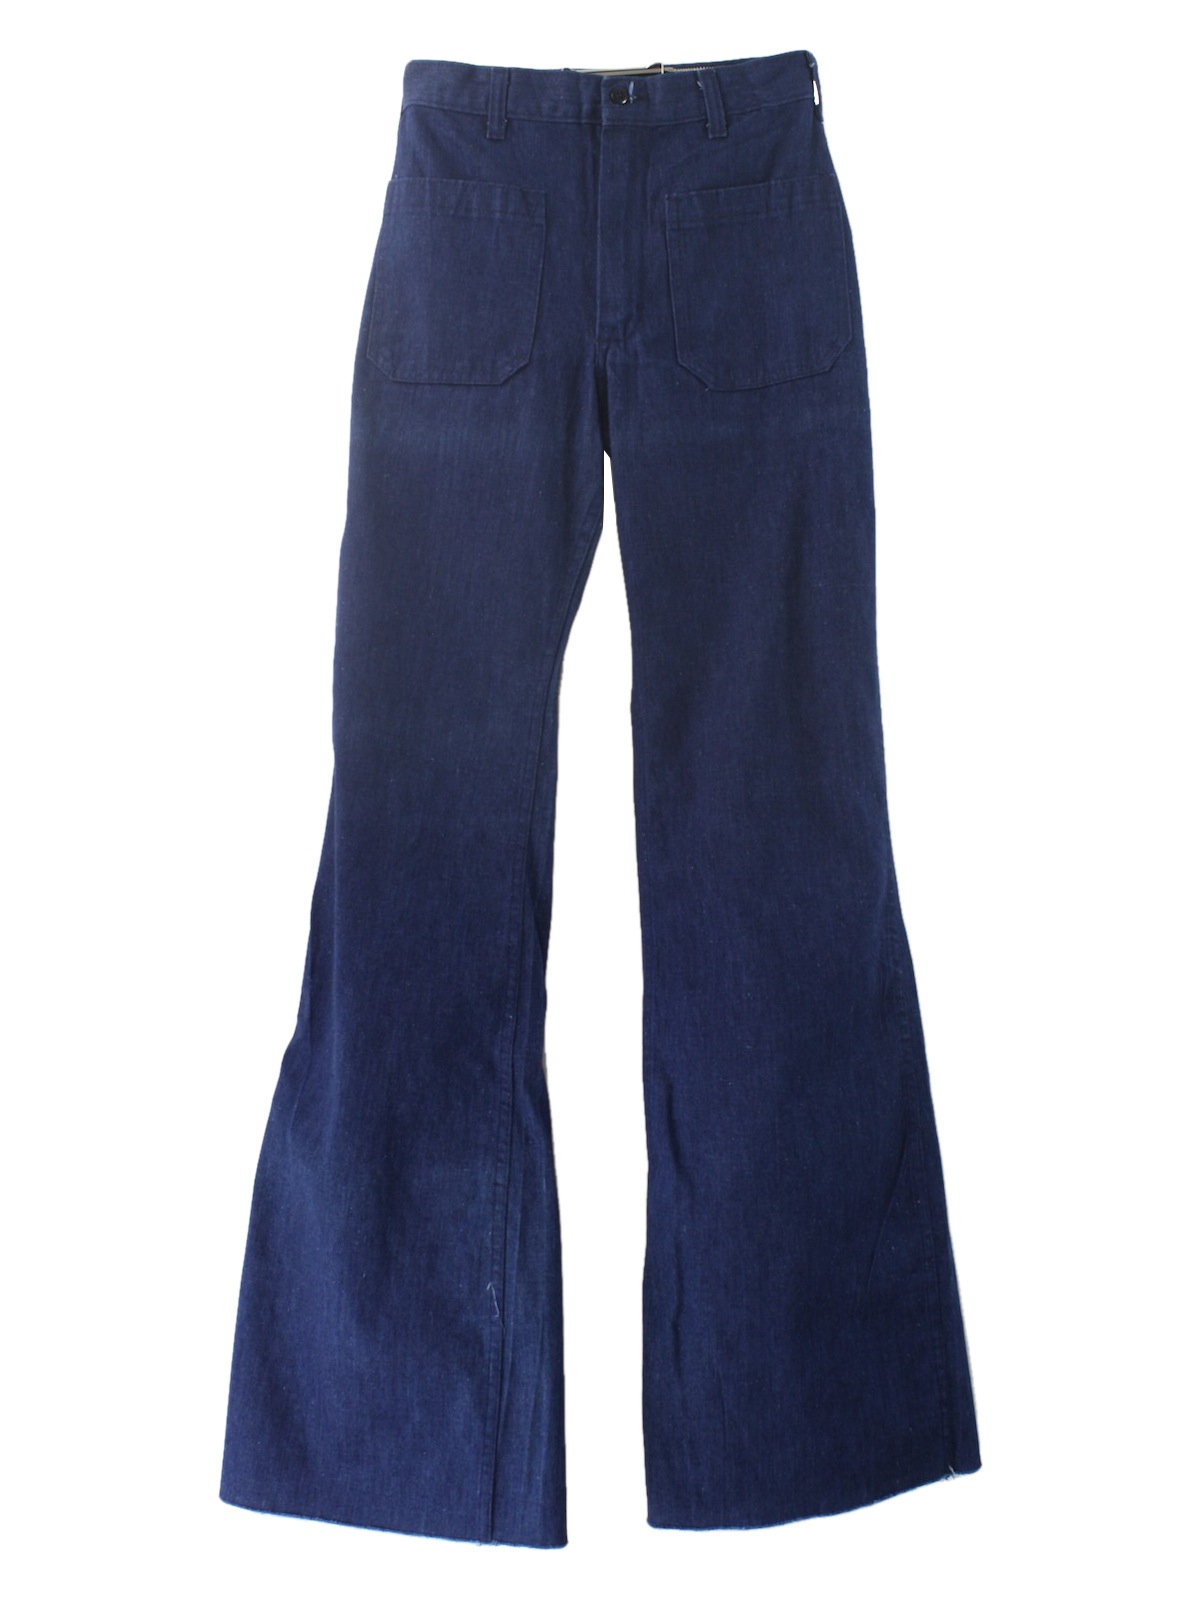 Retro 1970's Bellbottom Pants (Southern Apparel Co.) : 70s -Southern ...